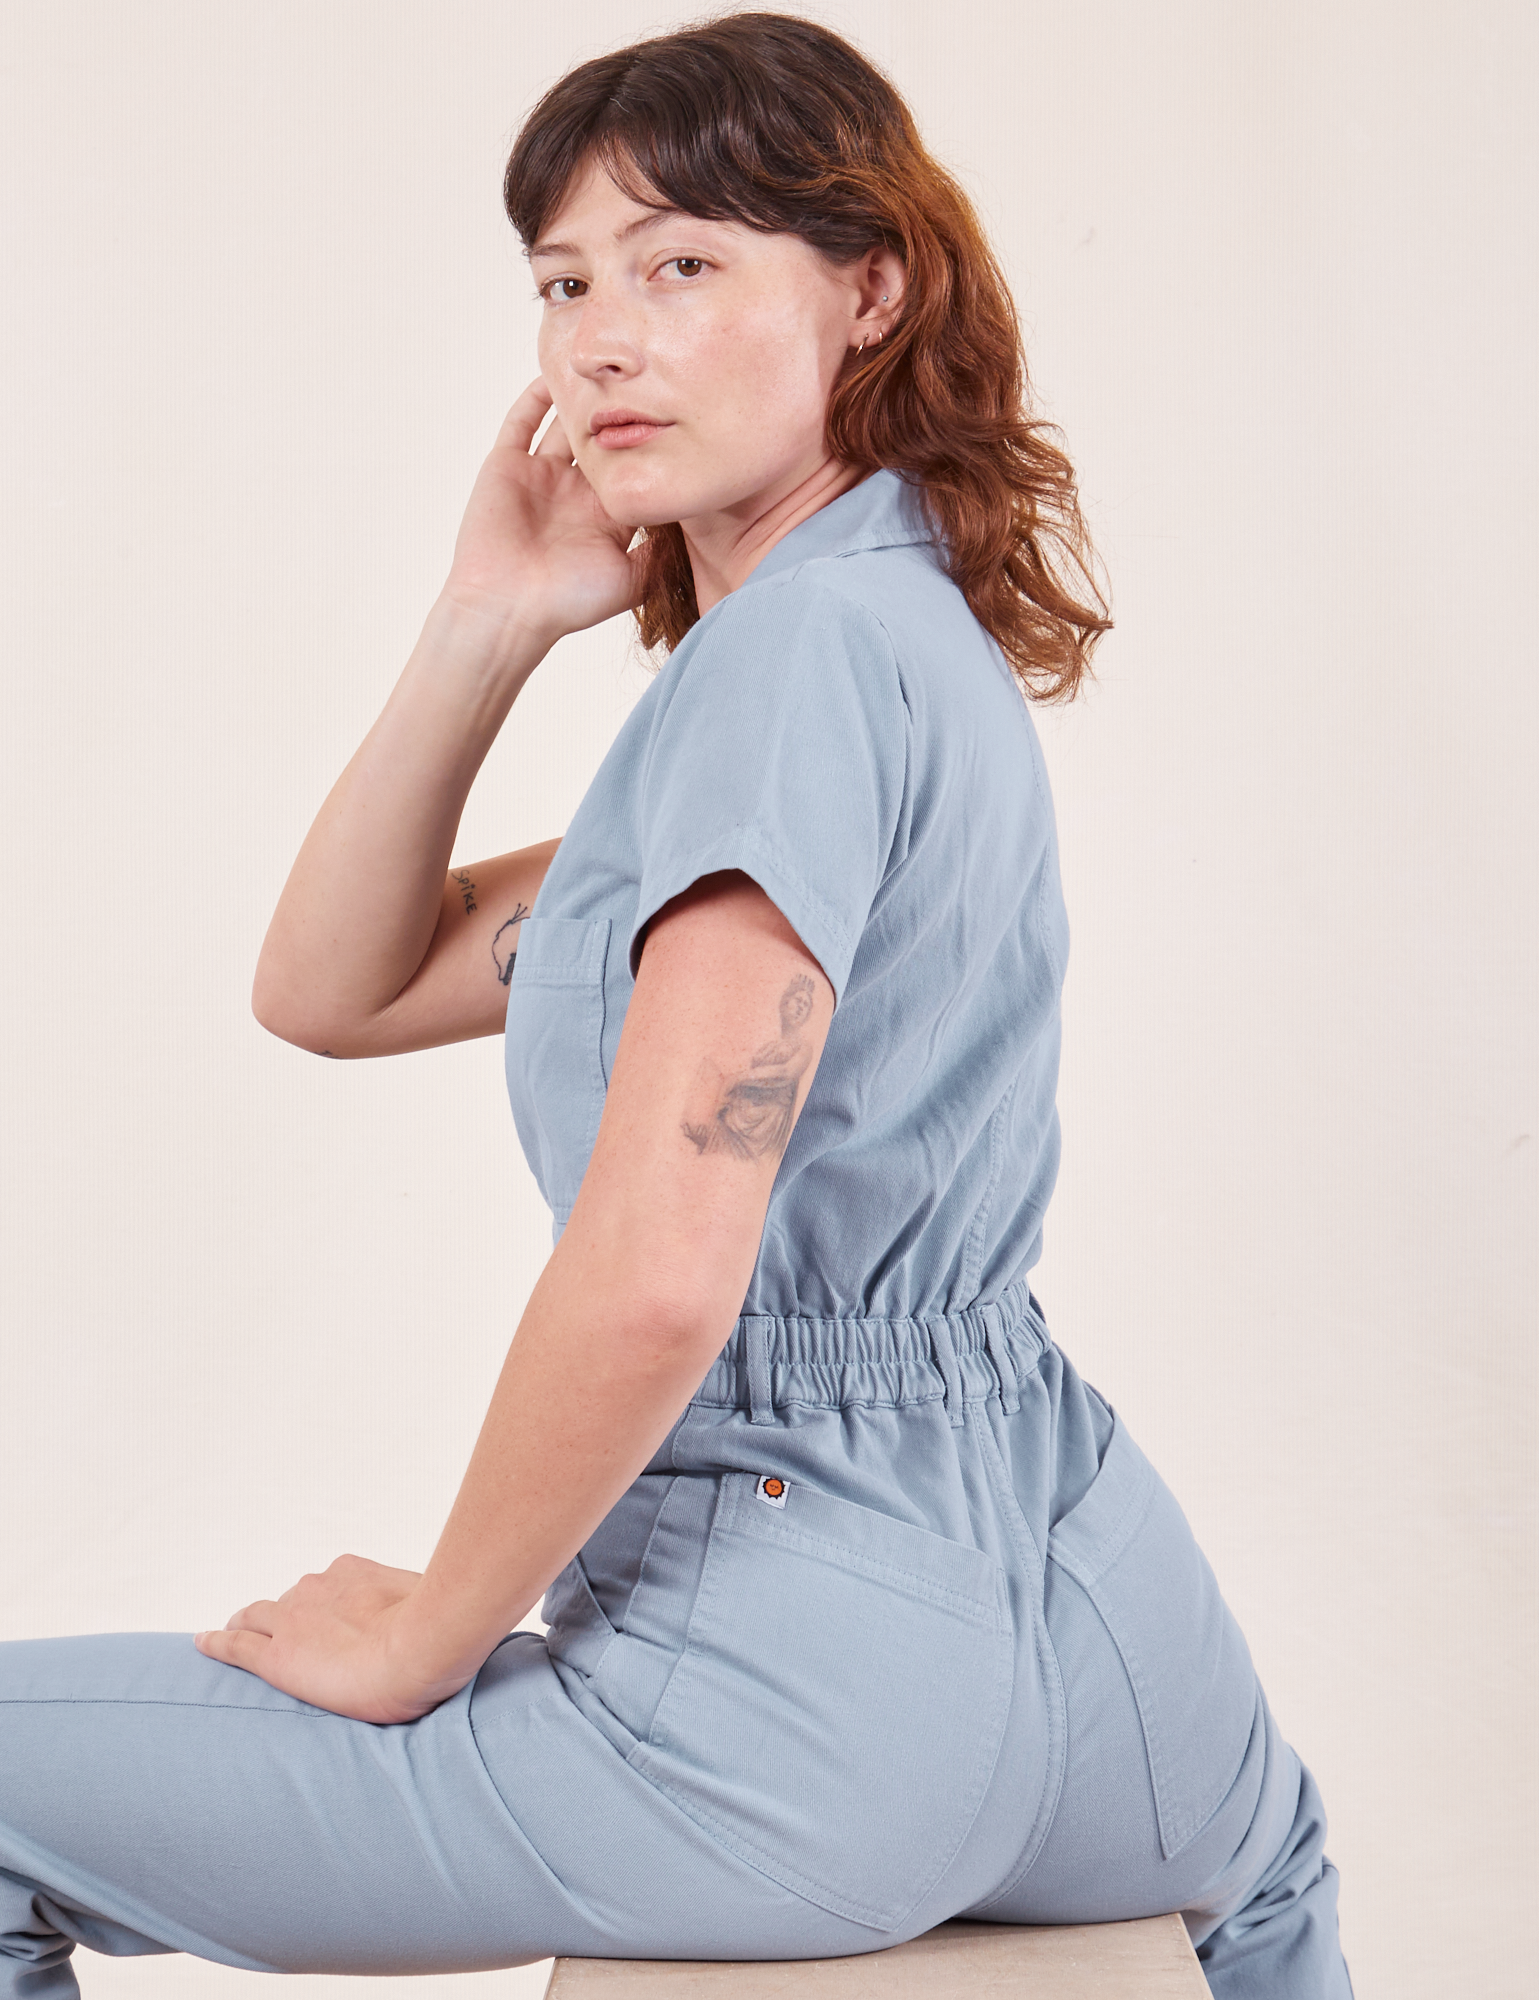 Back view of Short Sleeve Jumpsuit in Periwinkle on Alex